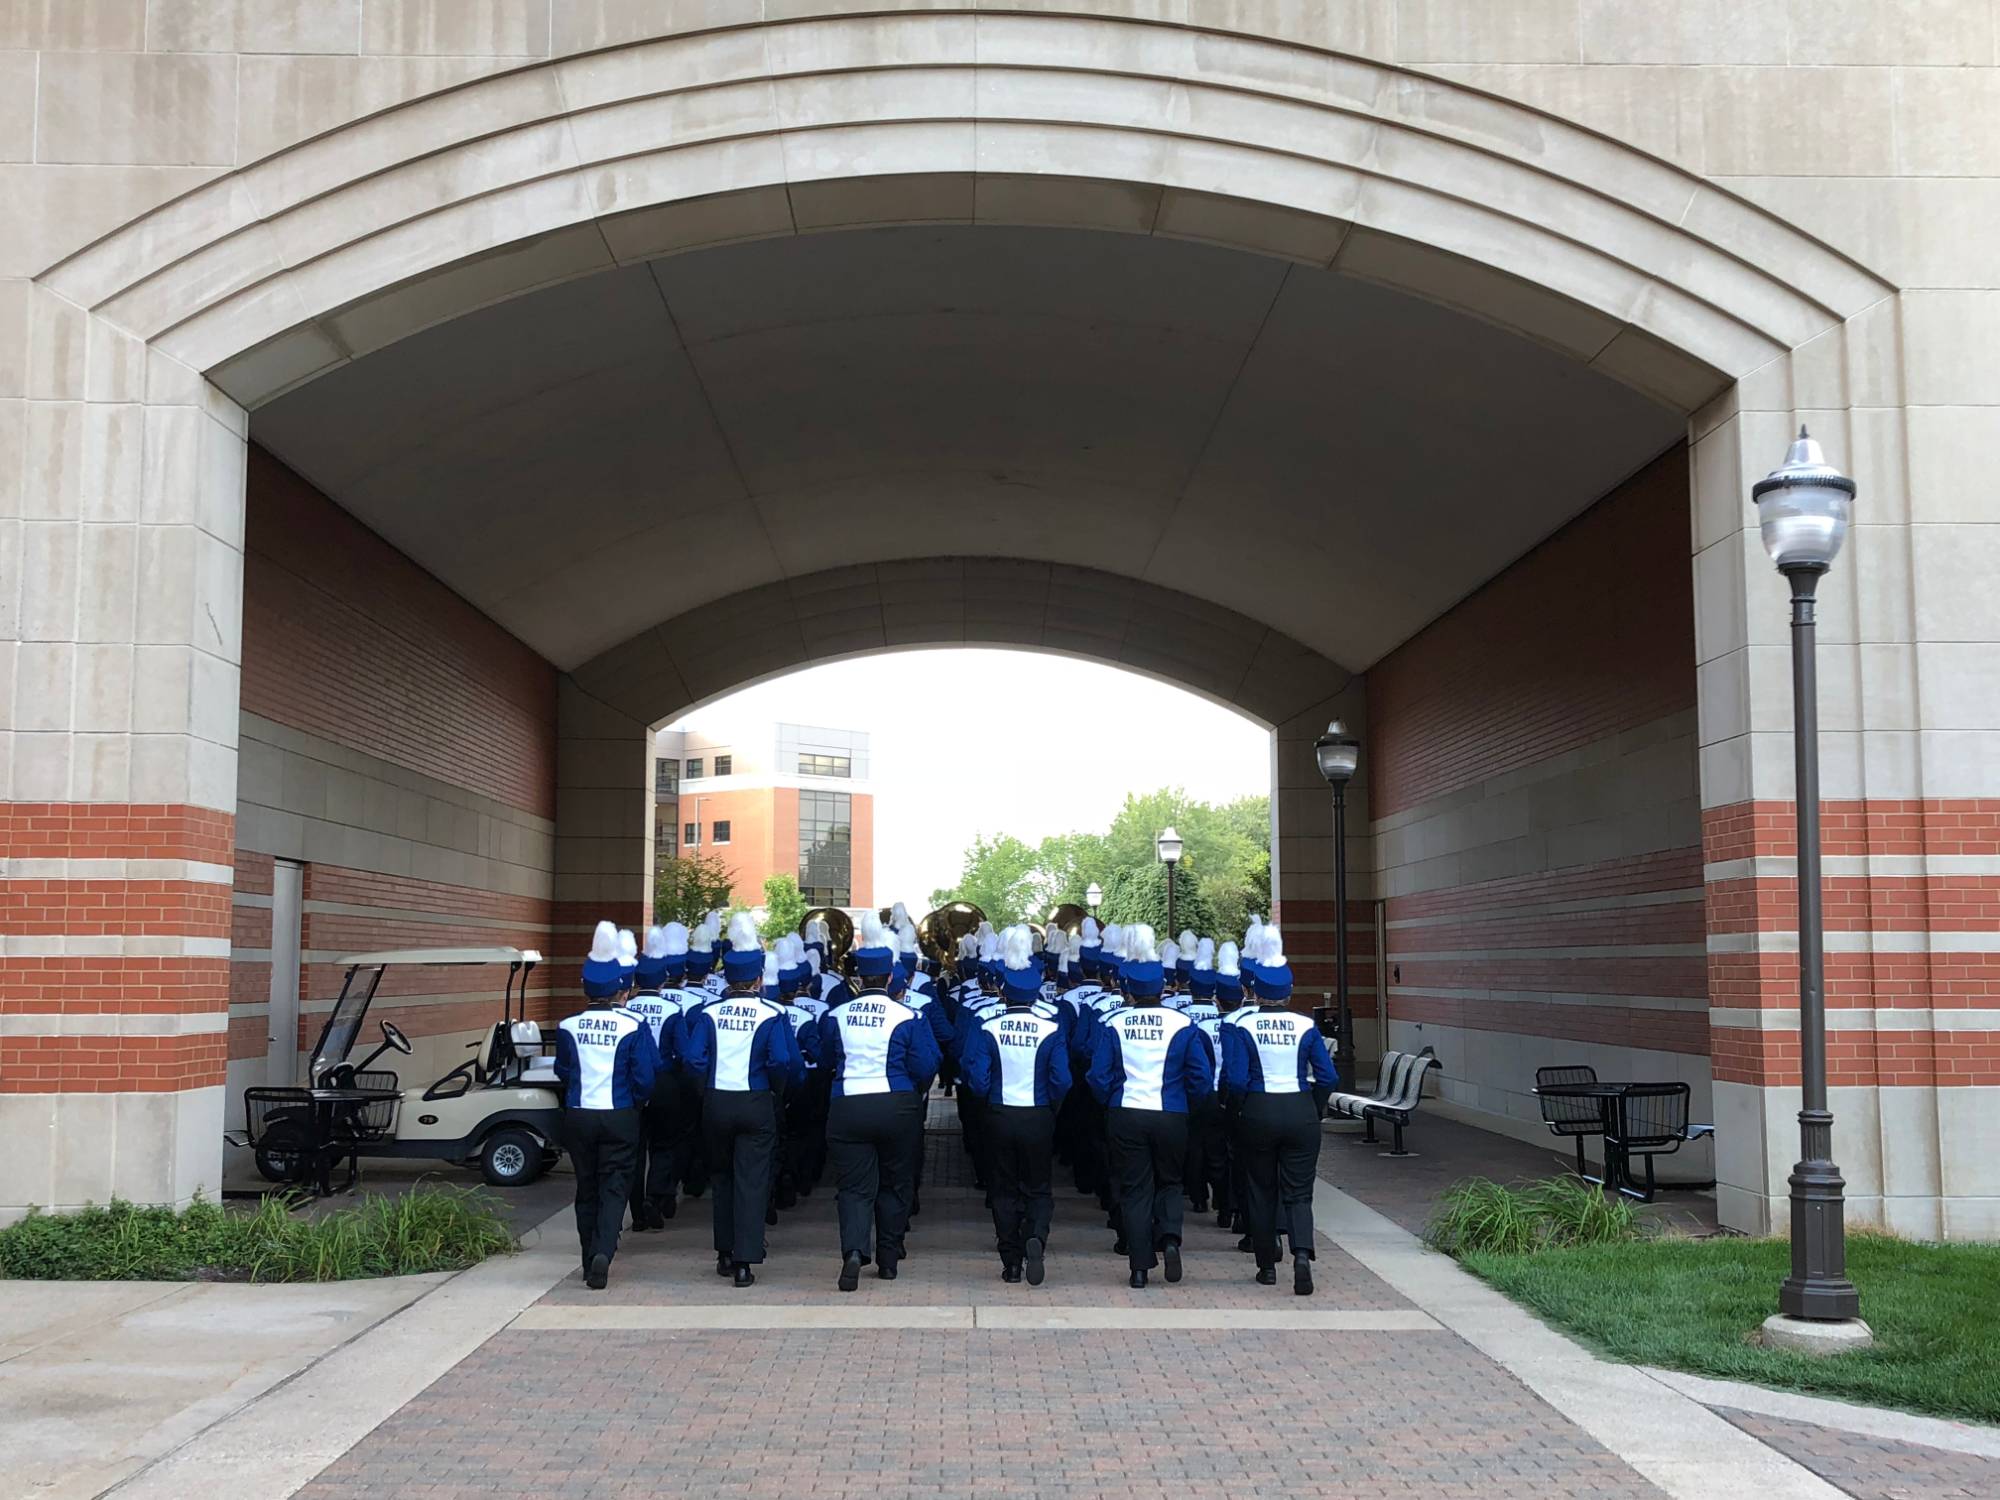 LMB marching under an archway